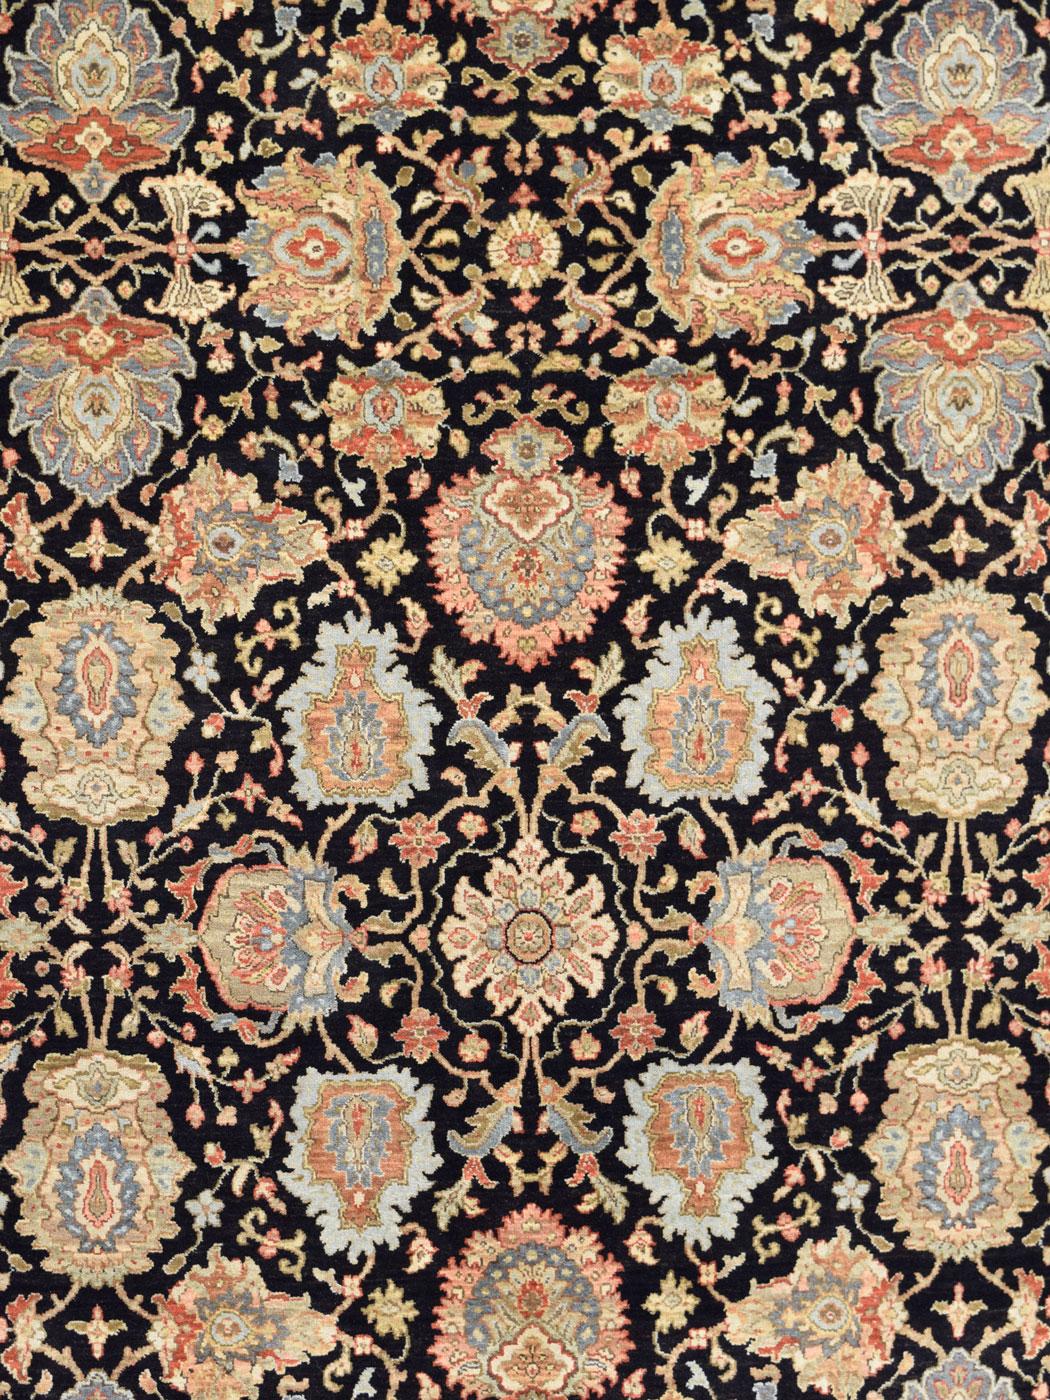 Vegetable Dyed Hand-Knotted Persian Agra Carpet, Red, Orange, and Black Wool, 6' x 9' For Sale